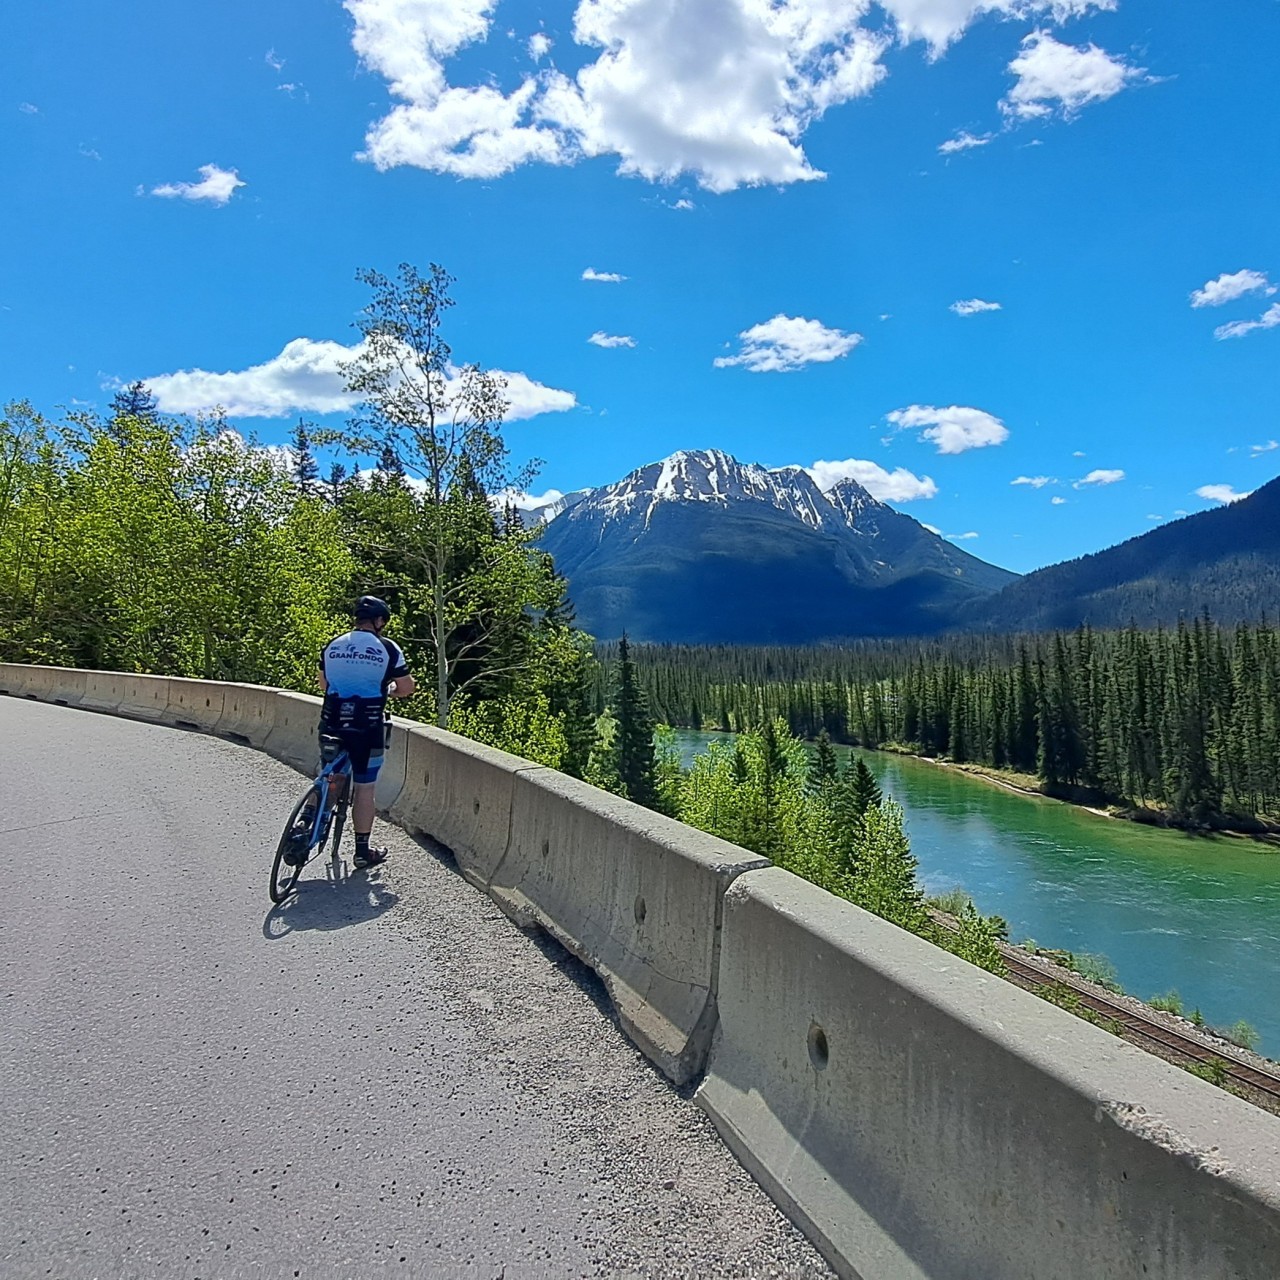 Road Biking in Banff National Park - The best thing about cycling the Bow Valley Parkway in Banff National Park are all the incredible mountain views. We had a perfect day, and I am pretty sure that I said, "Wow, this is so pretty" around every bend.
